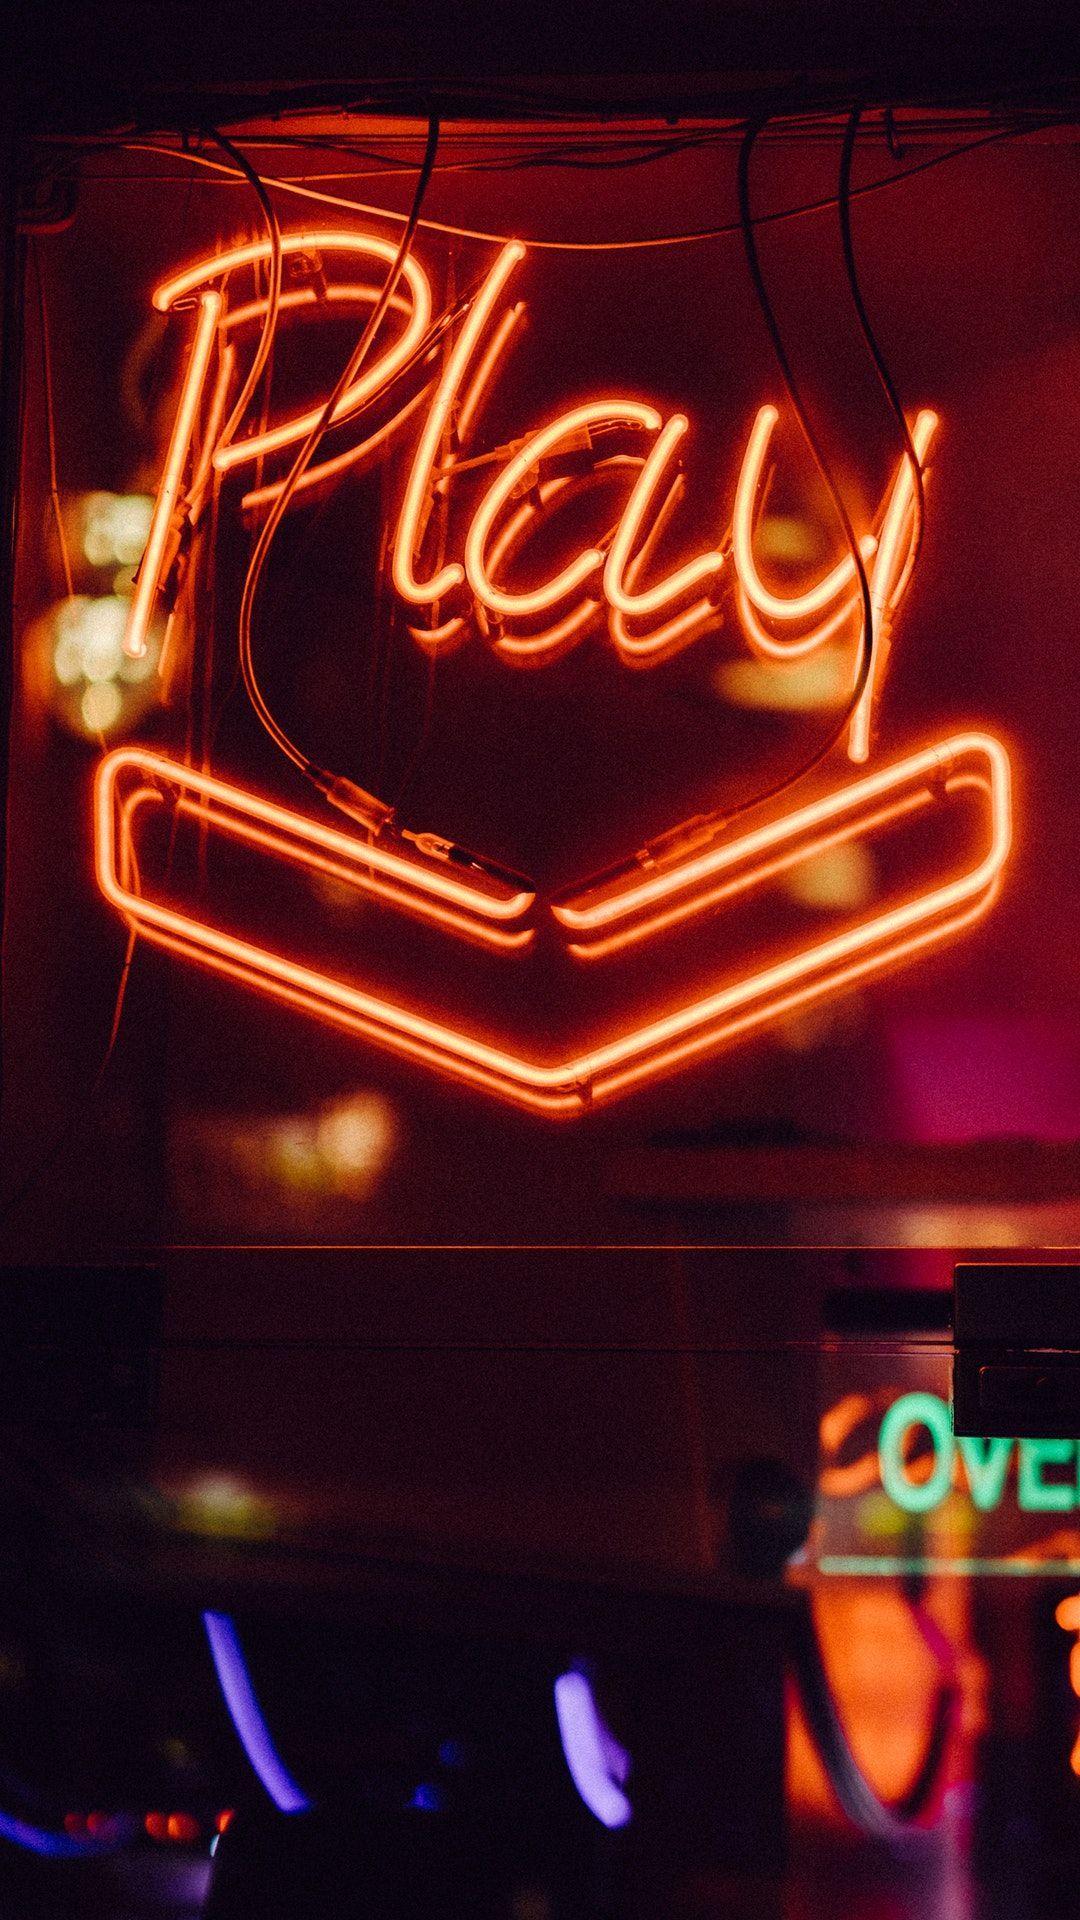 A neon sign that says play - Neon orange